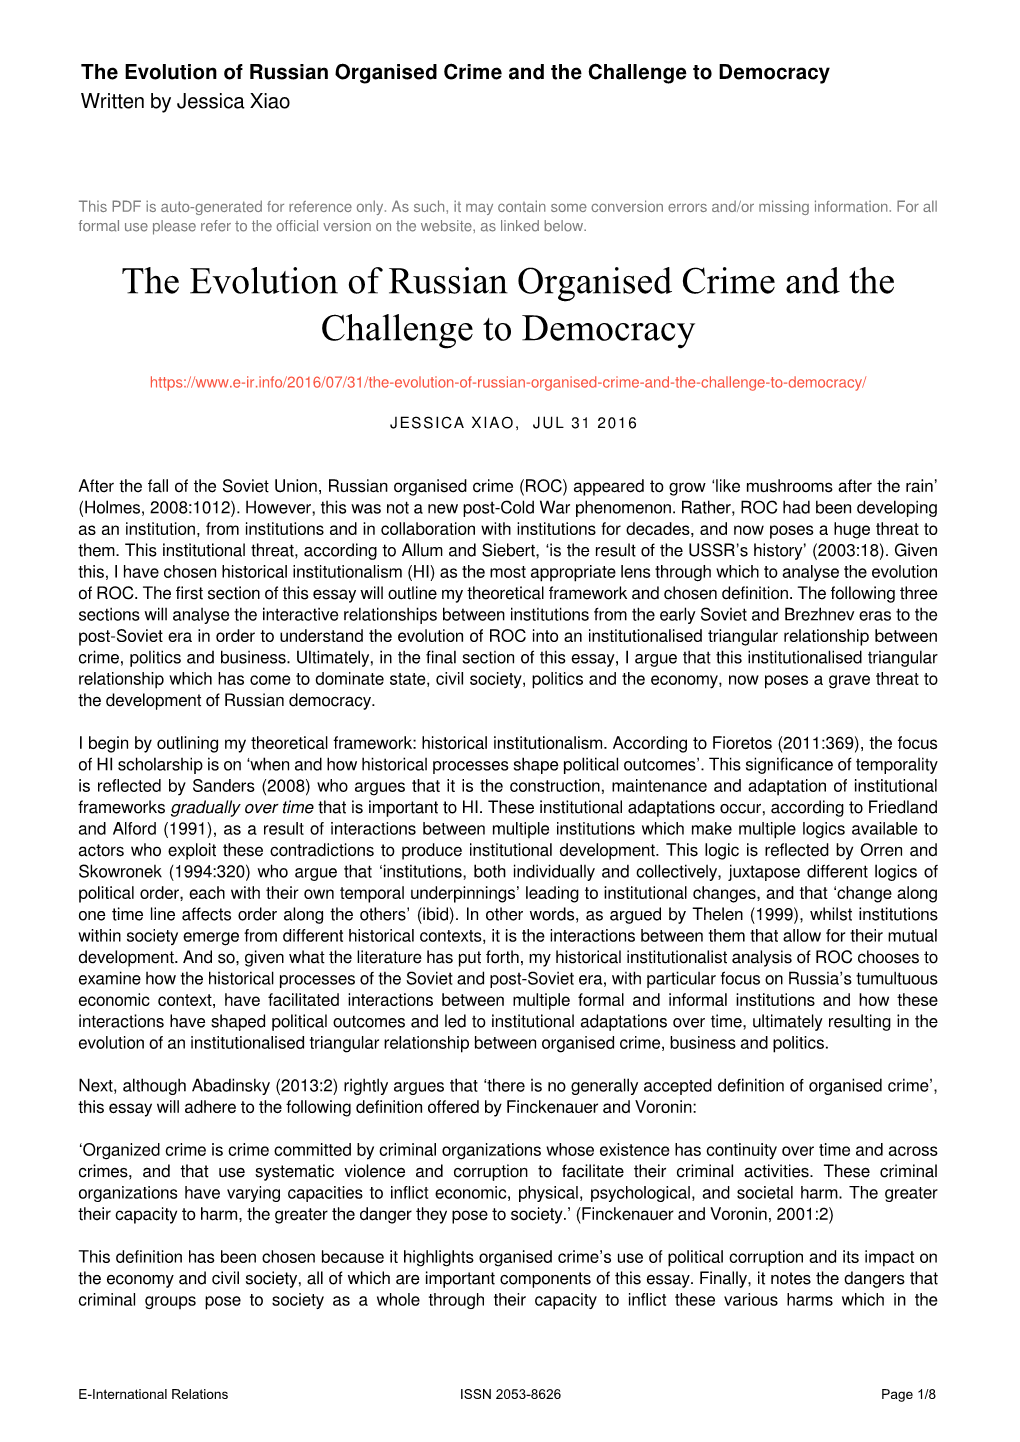 The Evolution of Russian Organised Crime and the Challenge to Democracy Written by Jessica Xiao